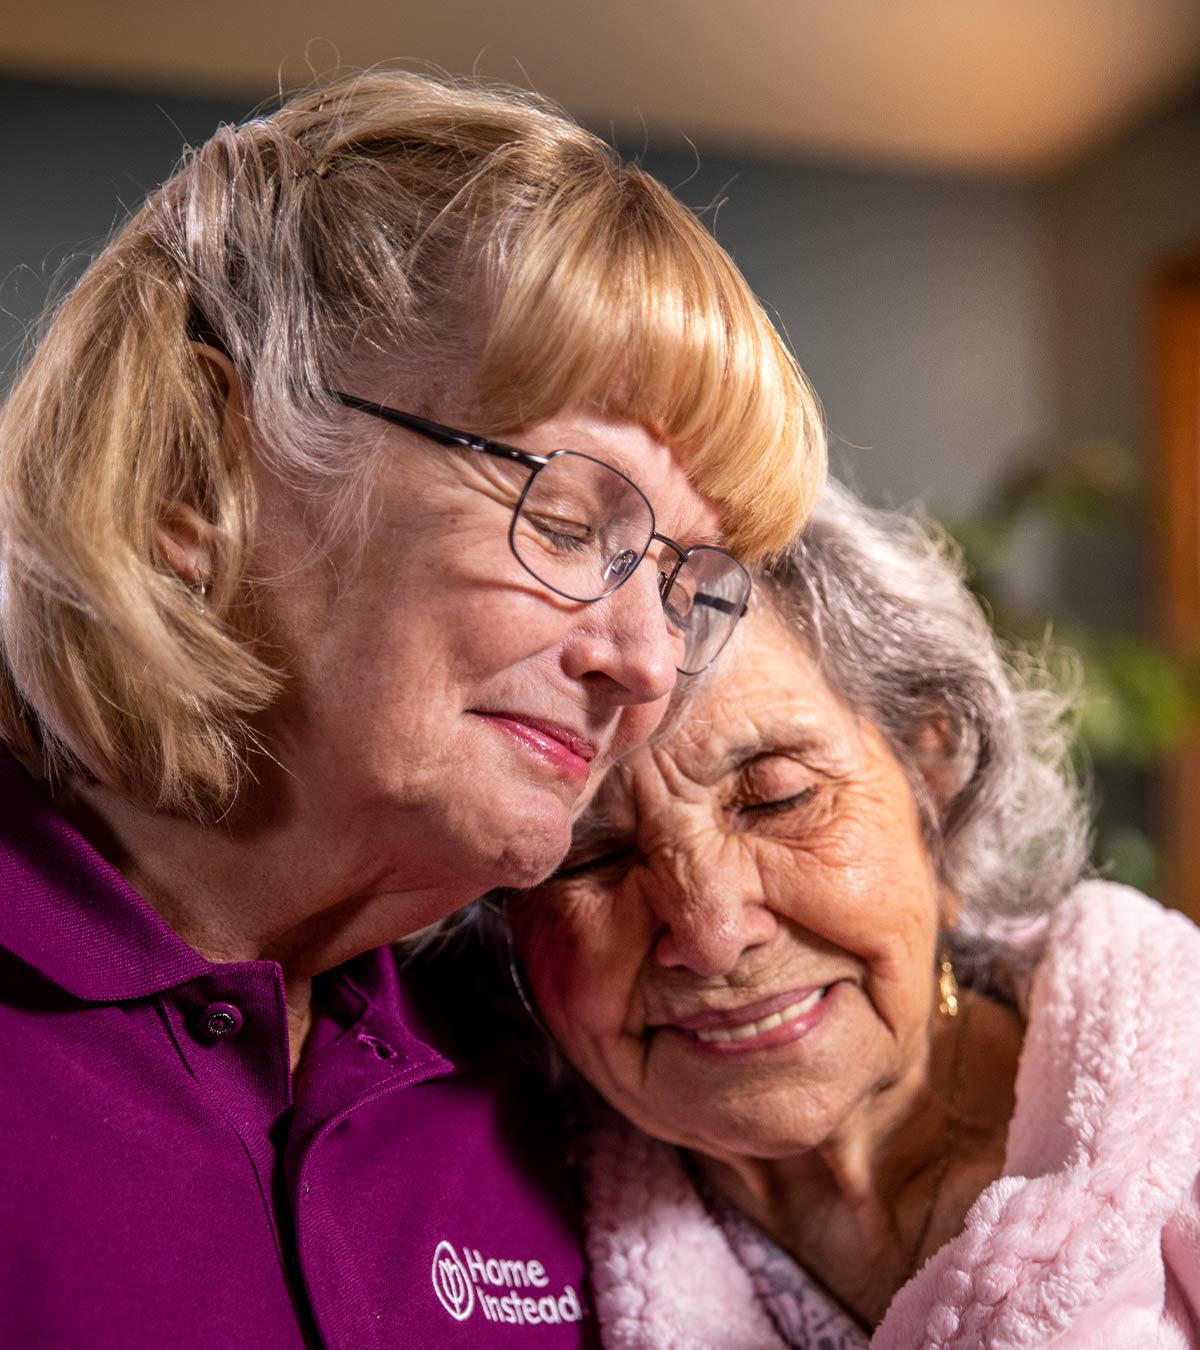 CAREGiver providing in-home senior care services. Home Instead of Rainbow City, AL provides Elder Care to aging adults. 